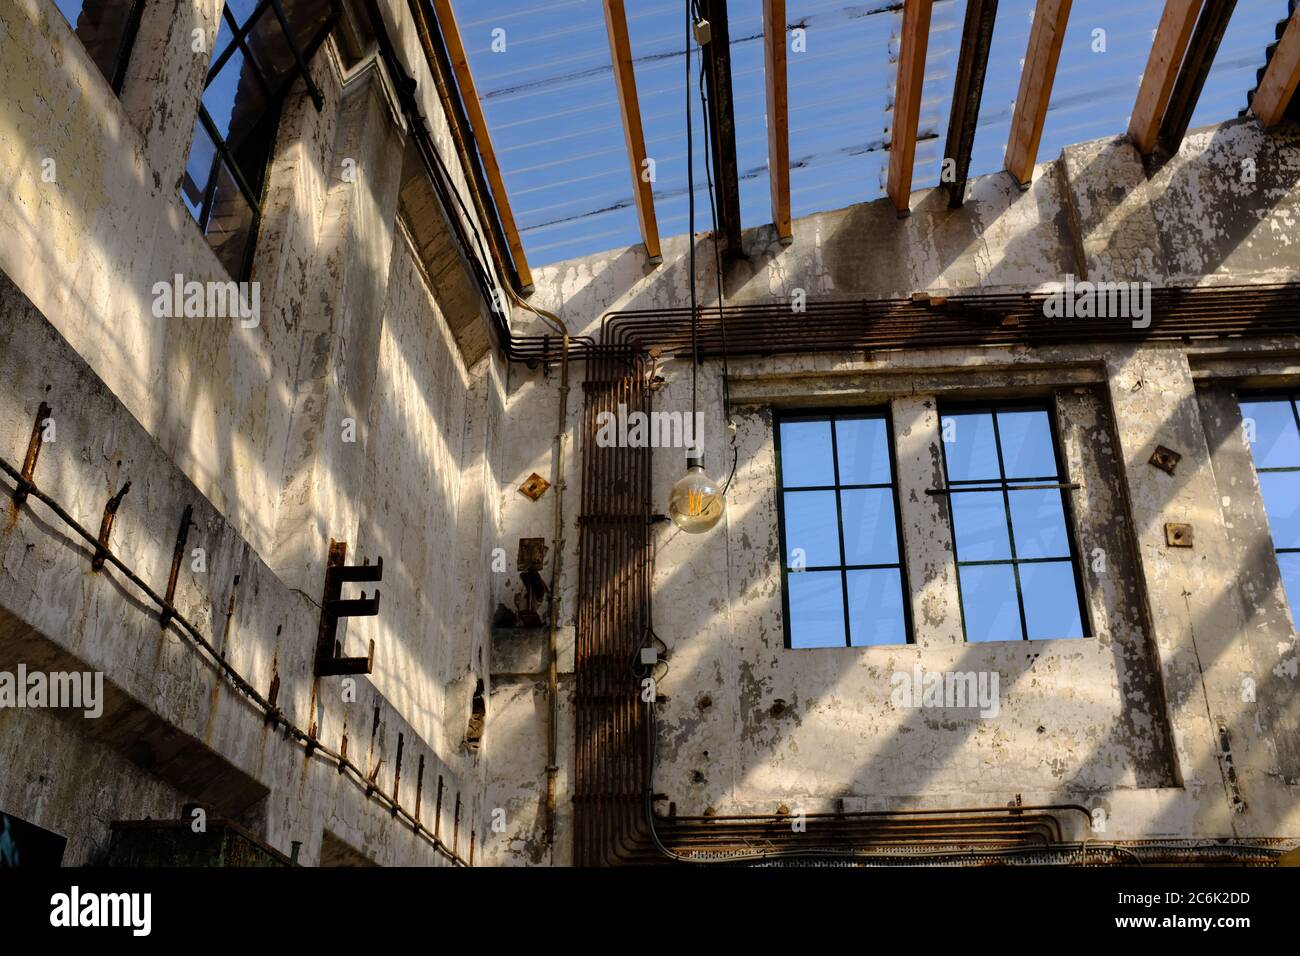 The interior of an abandoned industrial warehouse building on old industrial park called Hembrug in the netherland Stock Photo